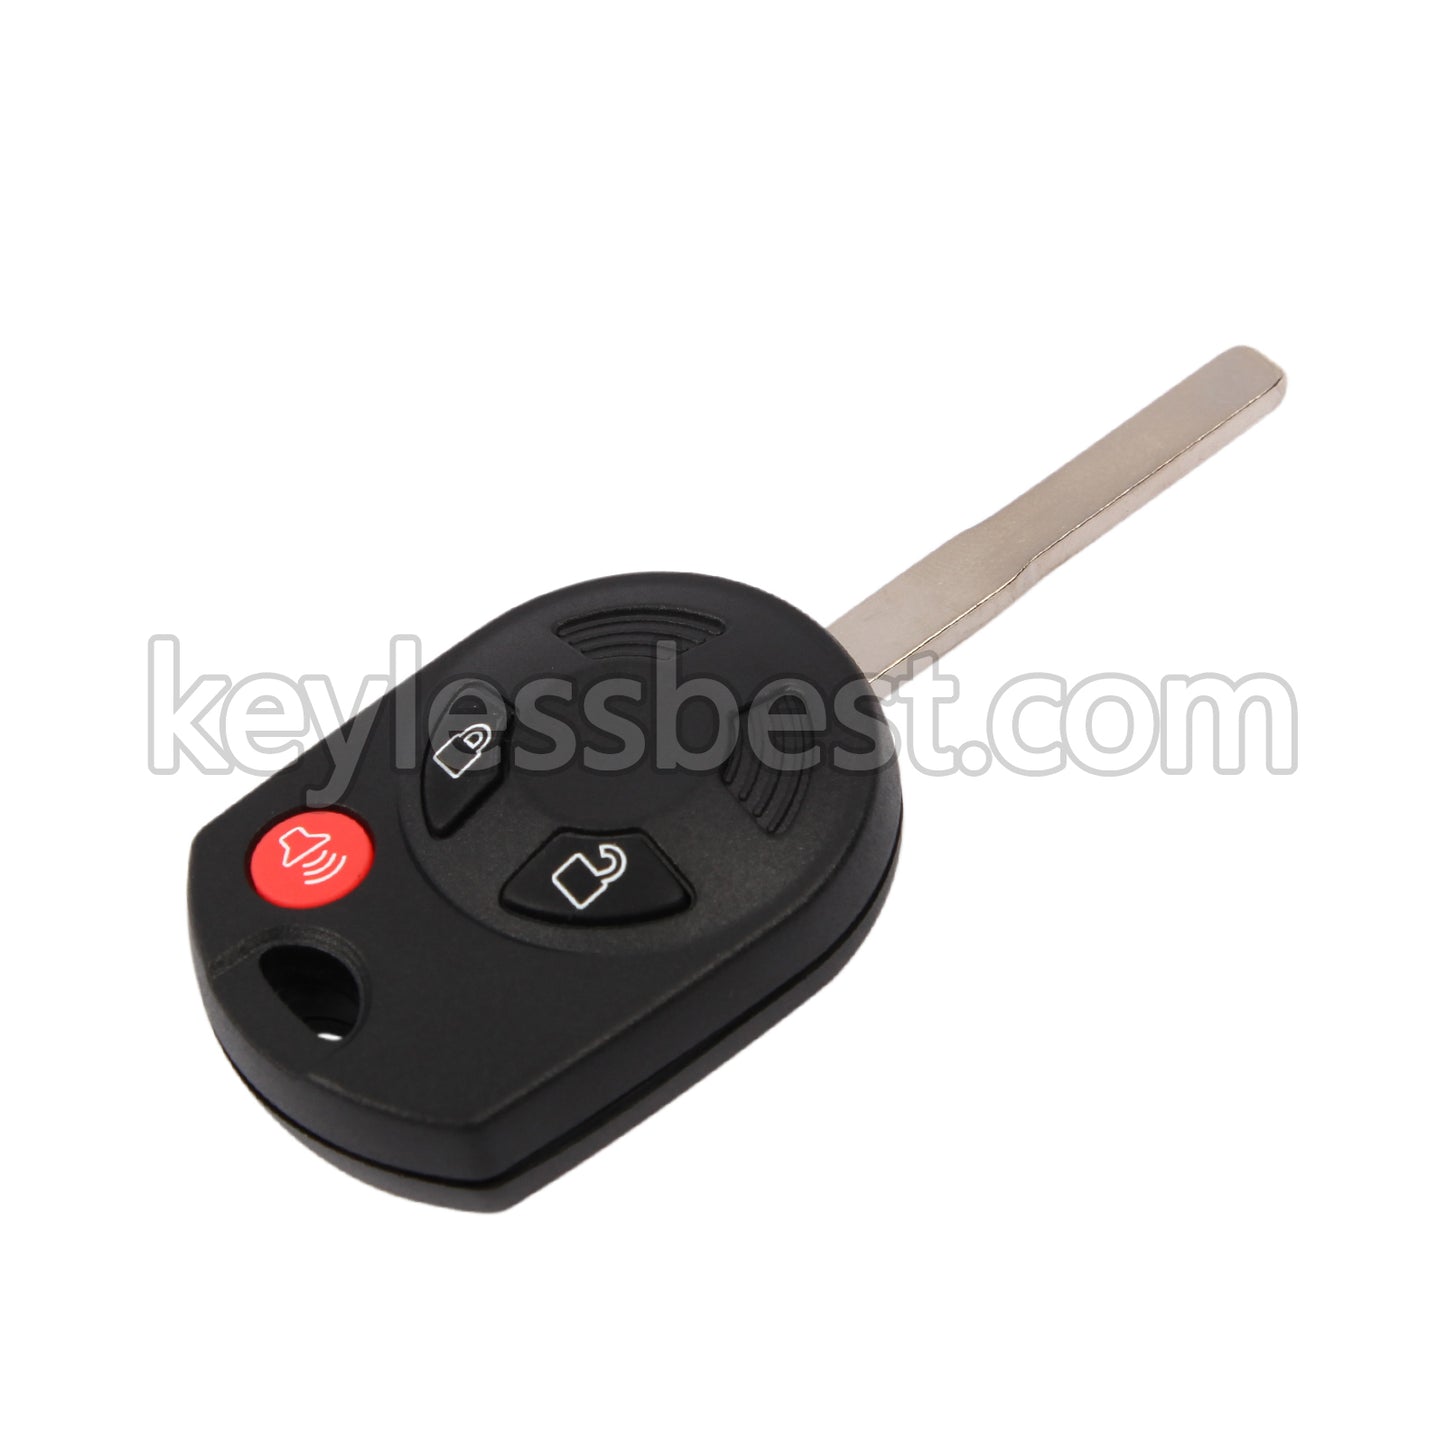 2013-2019 Ford C-Max Escape Focus Transit F350 Fiesta / 3 Button Remote Key / OUCD6000022 / 315MHz